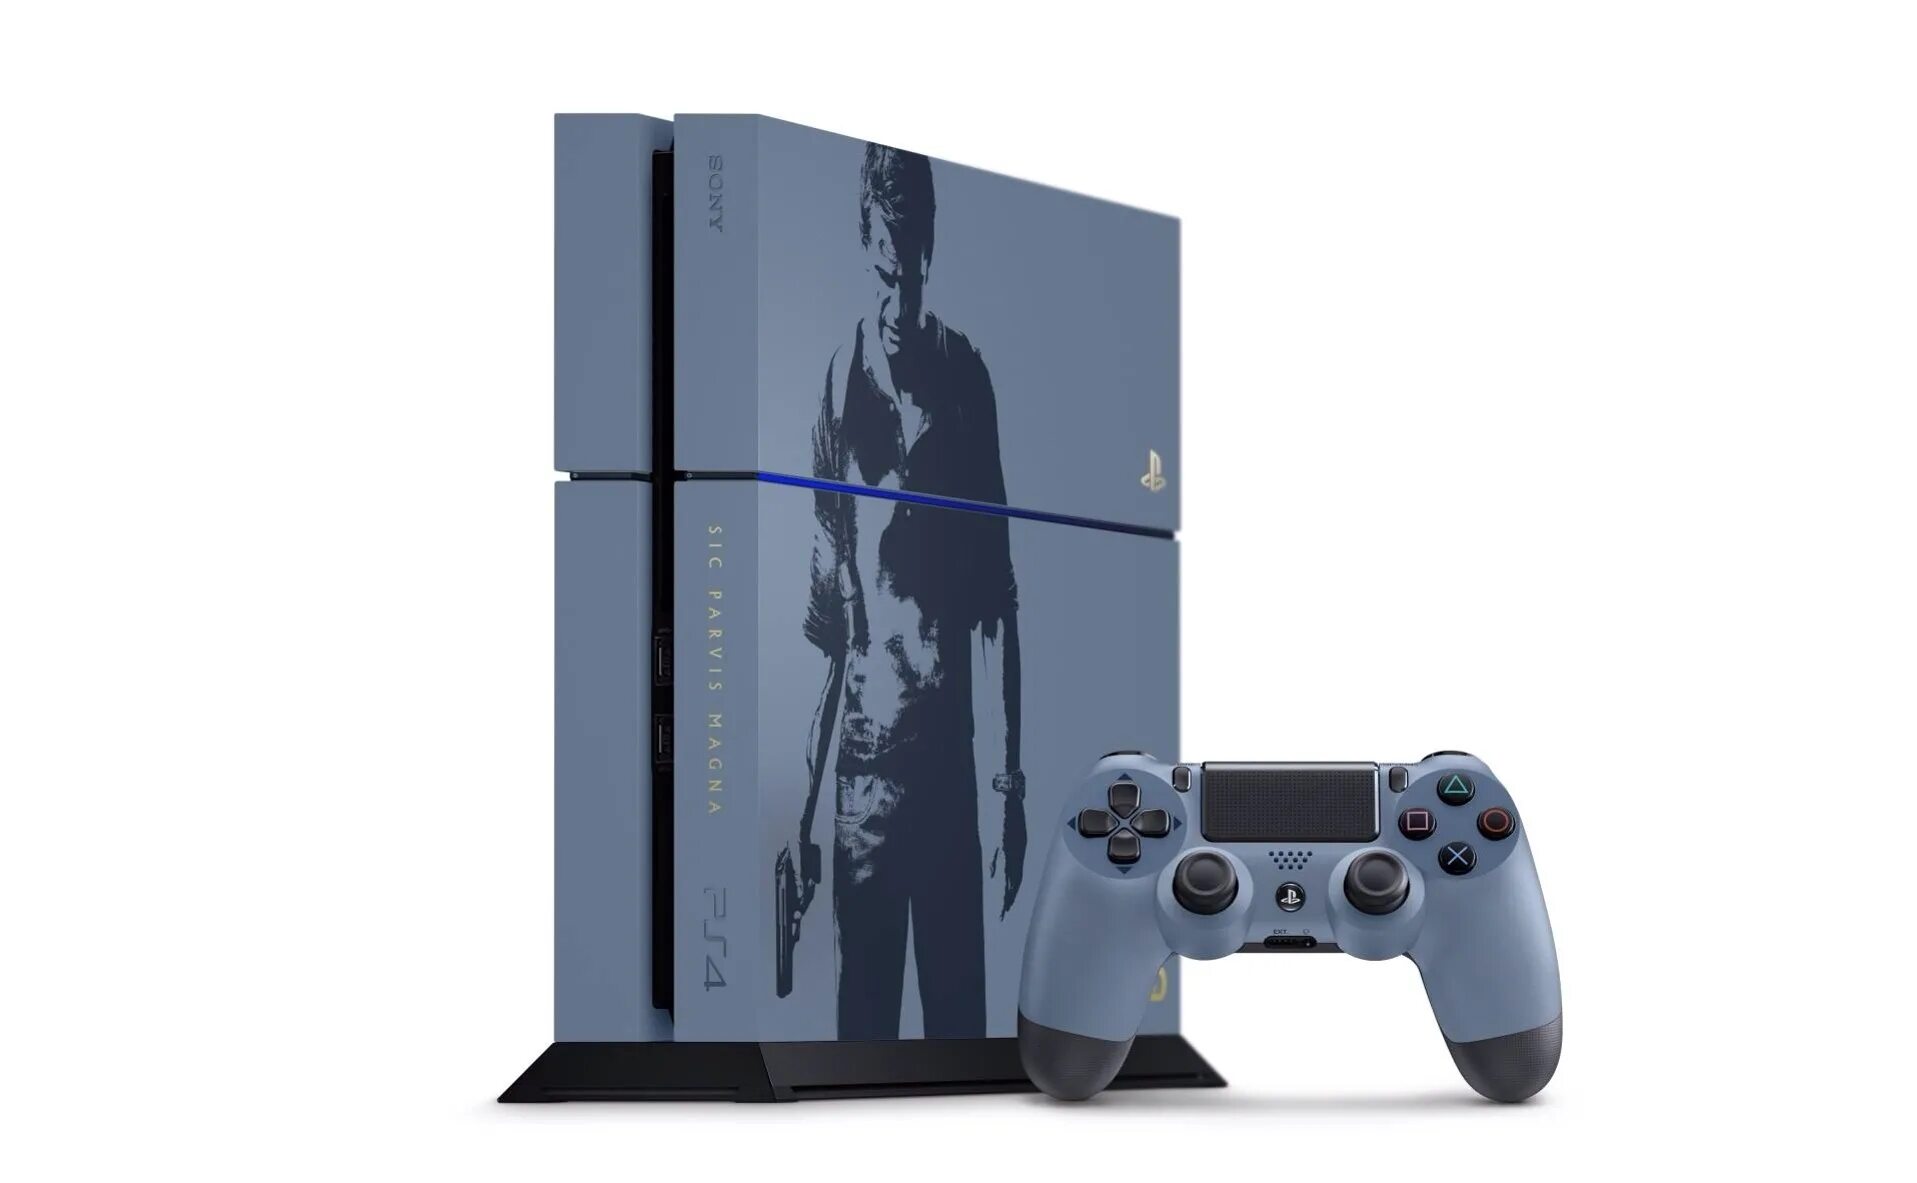 Крутые ps4. Ps4 Uncharted 4 Limited. Ps4 Uncharted 4 Limited Edition. Uncharted 4 ps4. PLAYSTATION 4 Uncharted Edition.